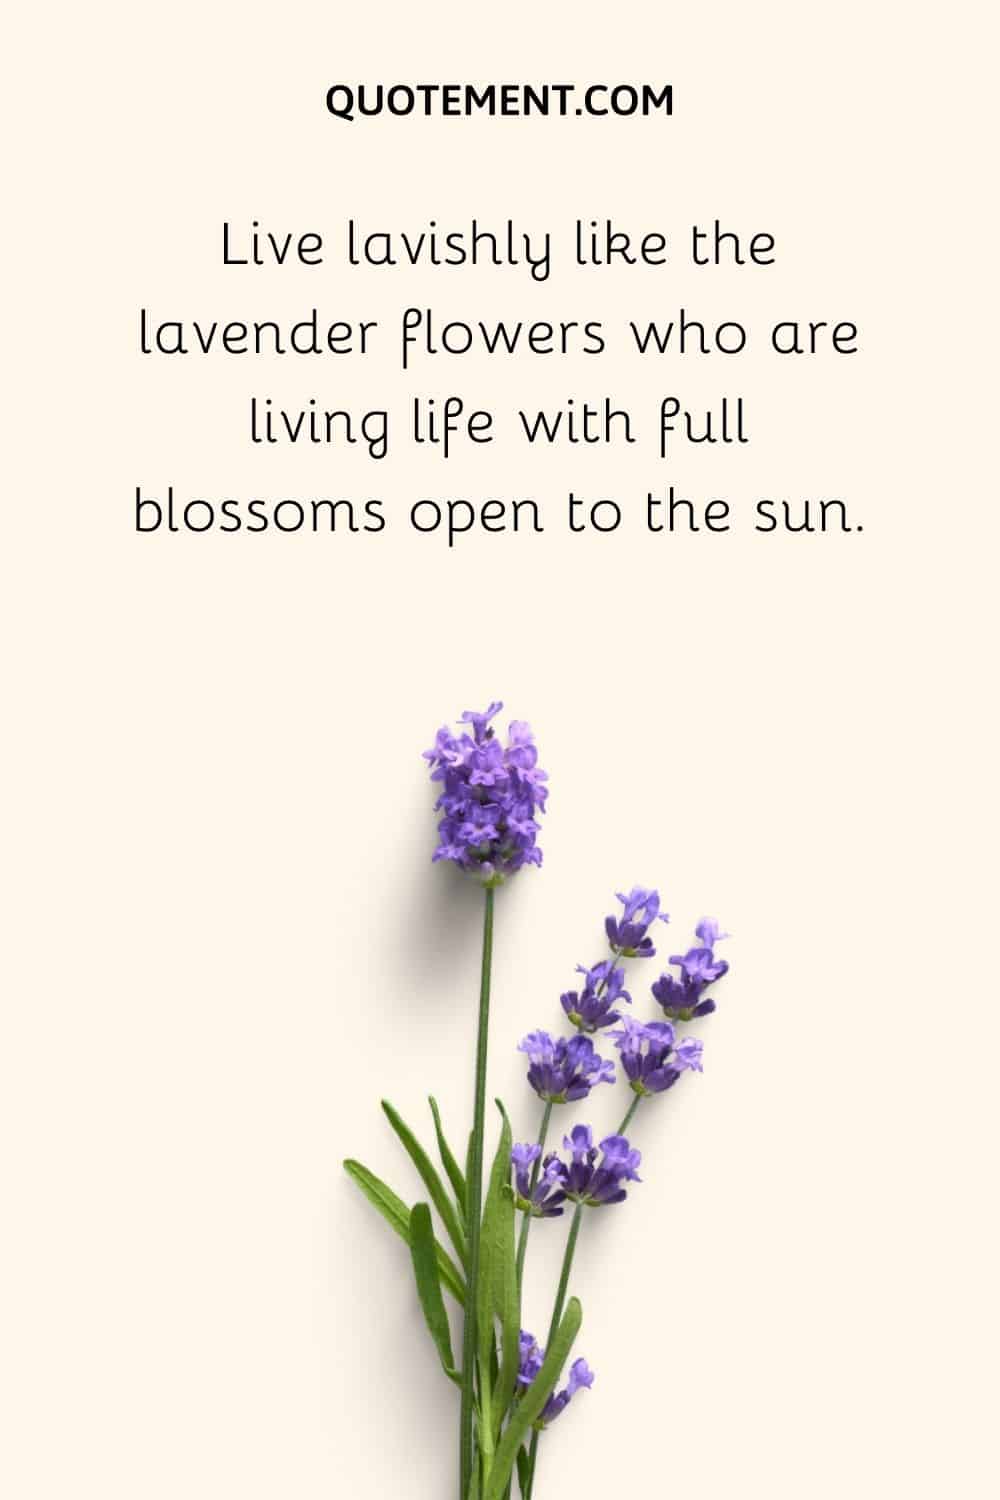 Live lavishly like the lavender flowers who are living life with full blossoms open to the sun